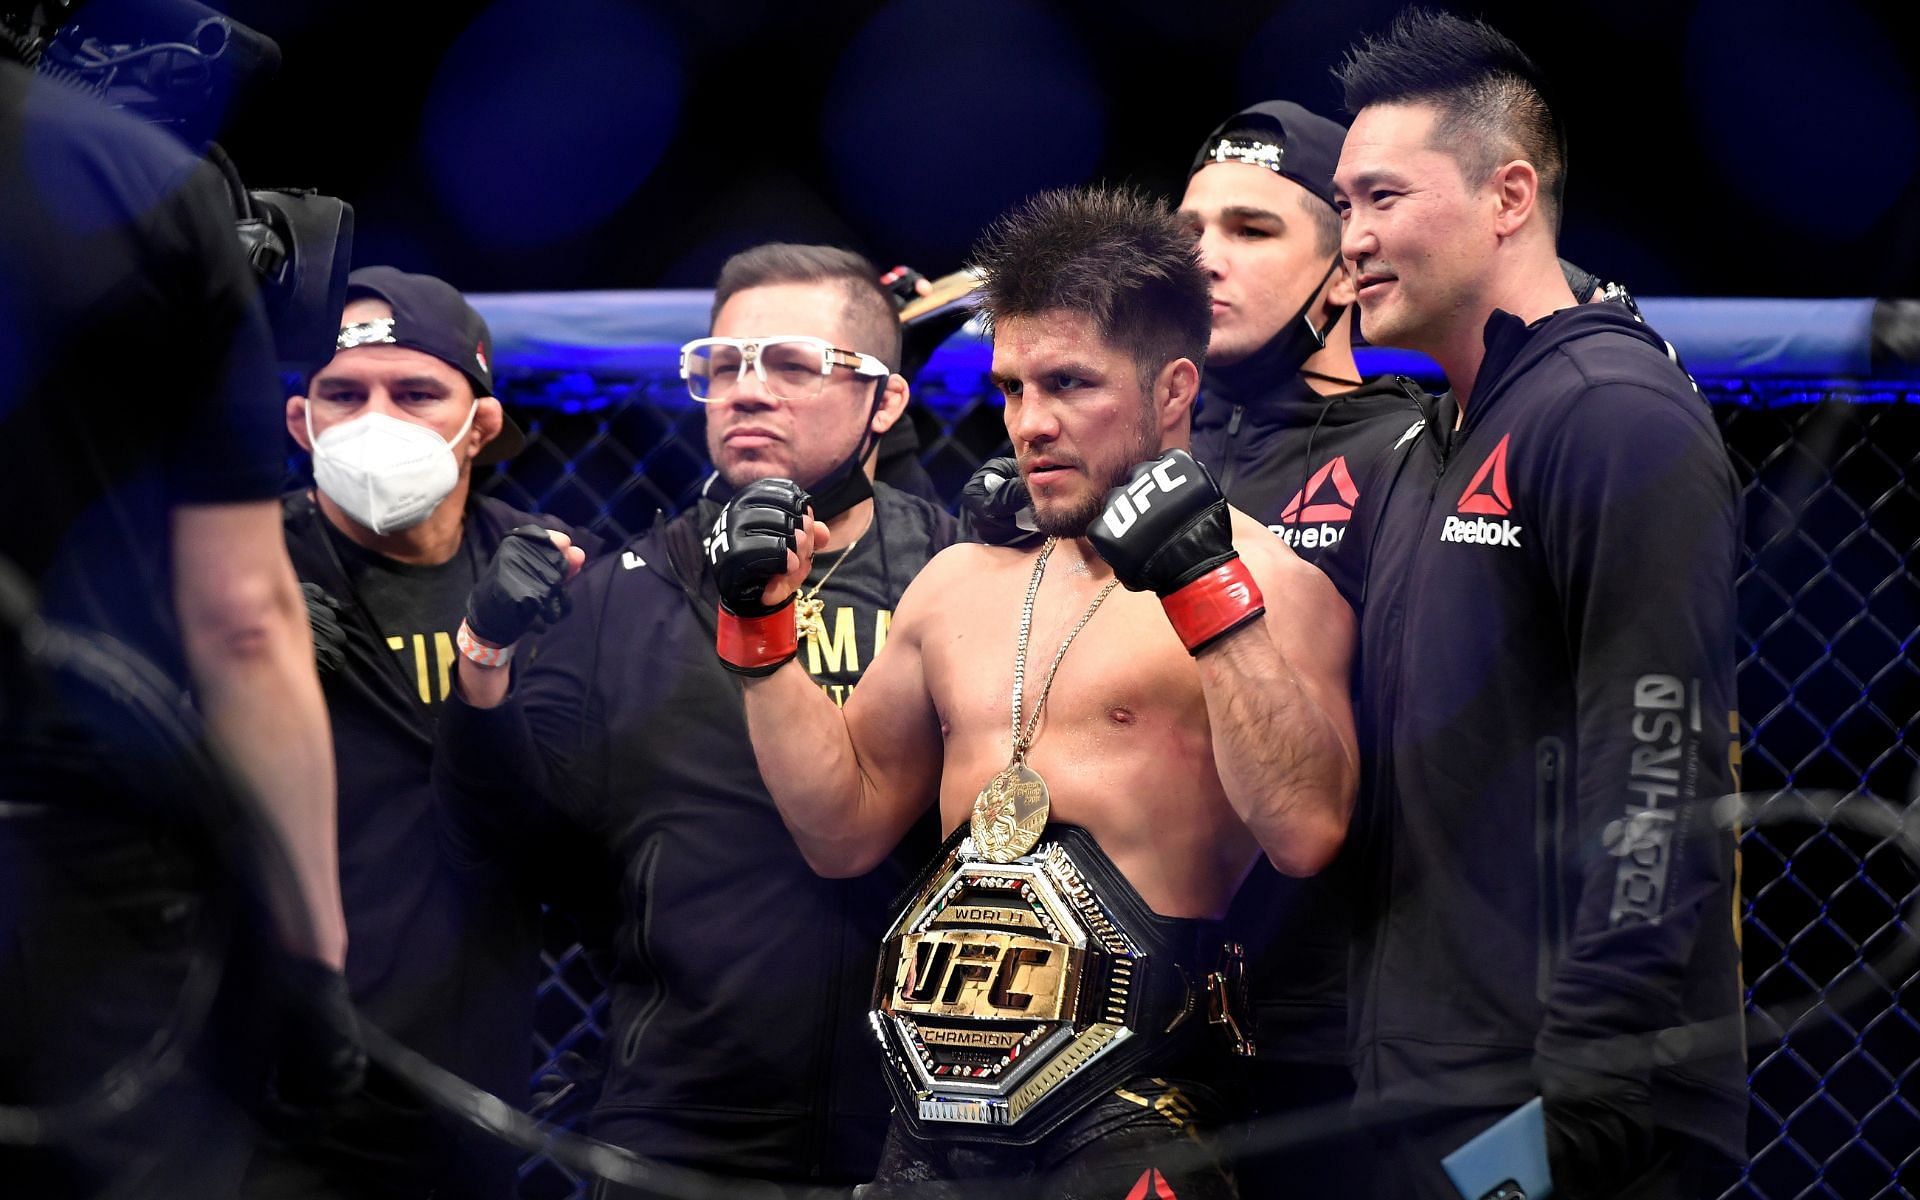 Former two-division UFC champion Henry Cejudo celebrates with his Fight Ready team after a successful title defense